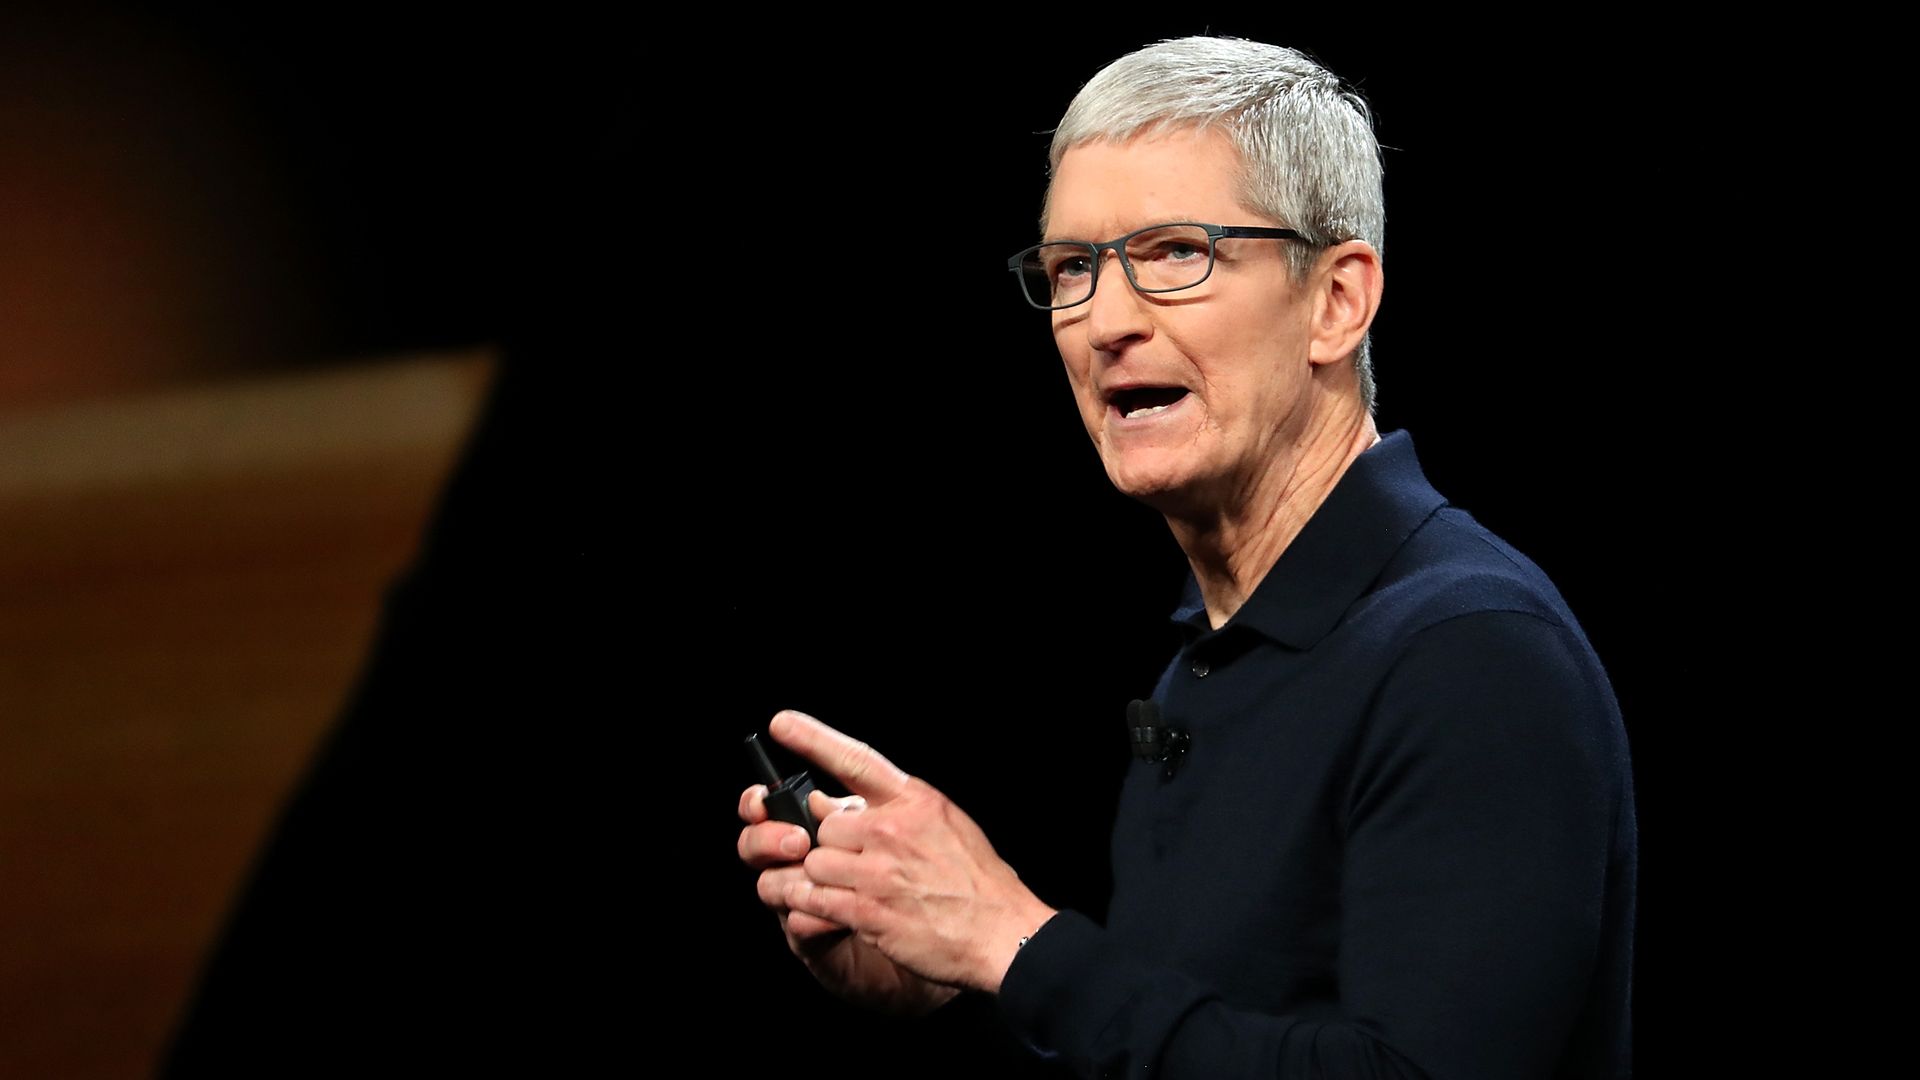 Tim Cook on stage at an event. 